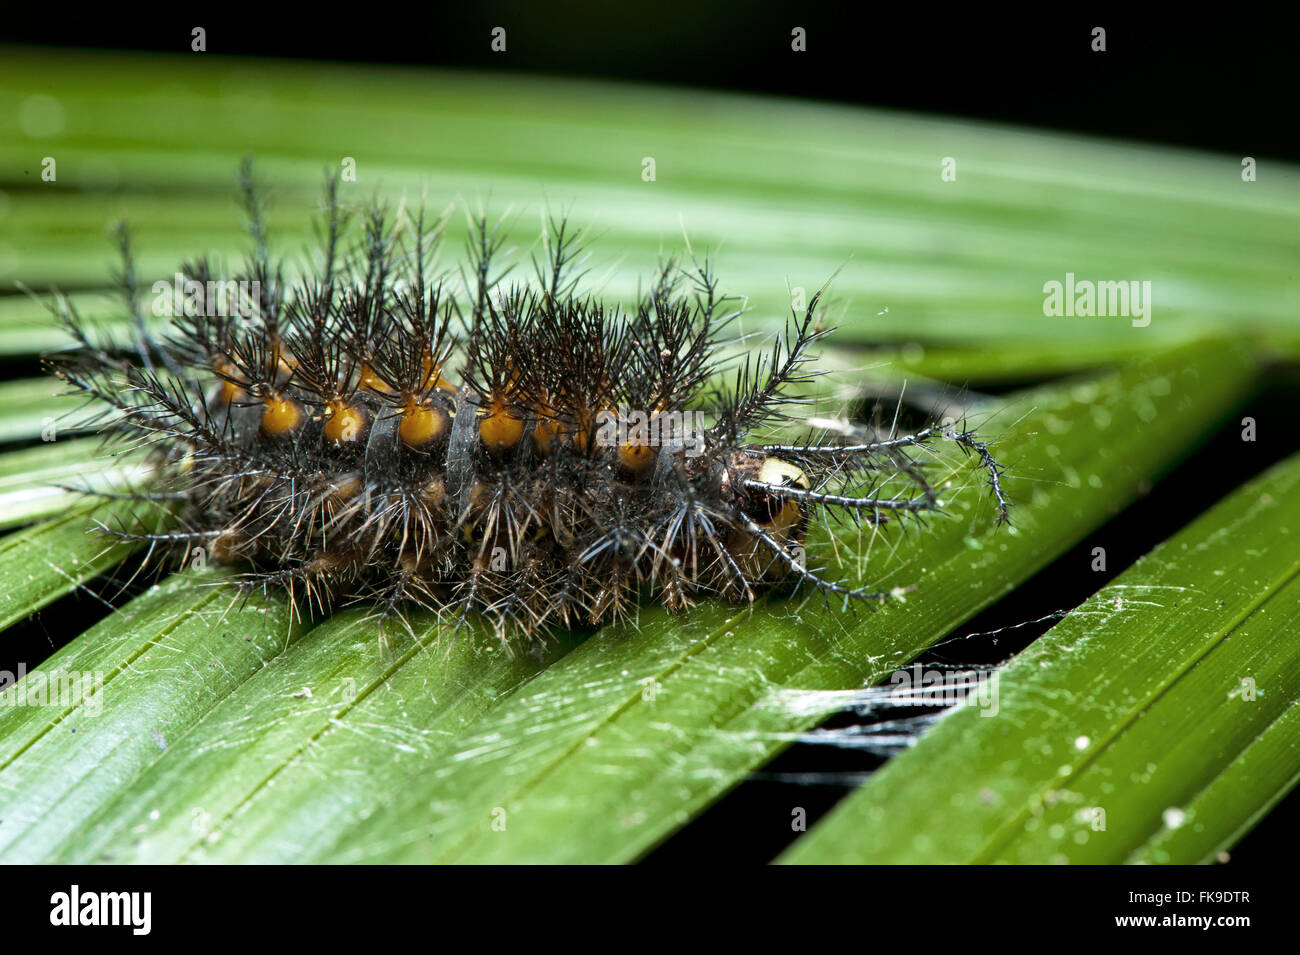 Caterpillar with stinging hairs on leaf in Amazon forest Stock Photo